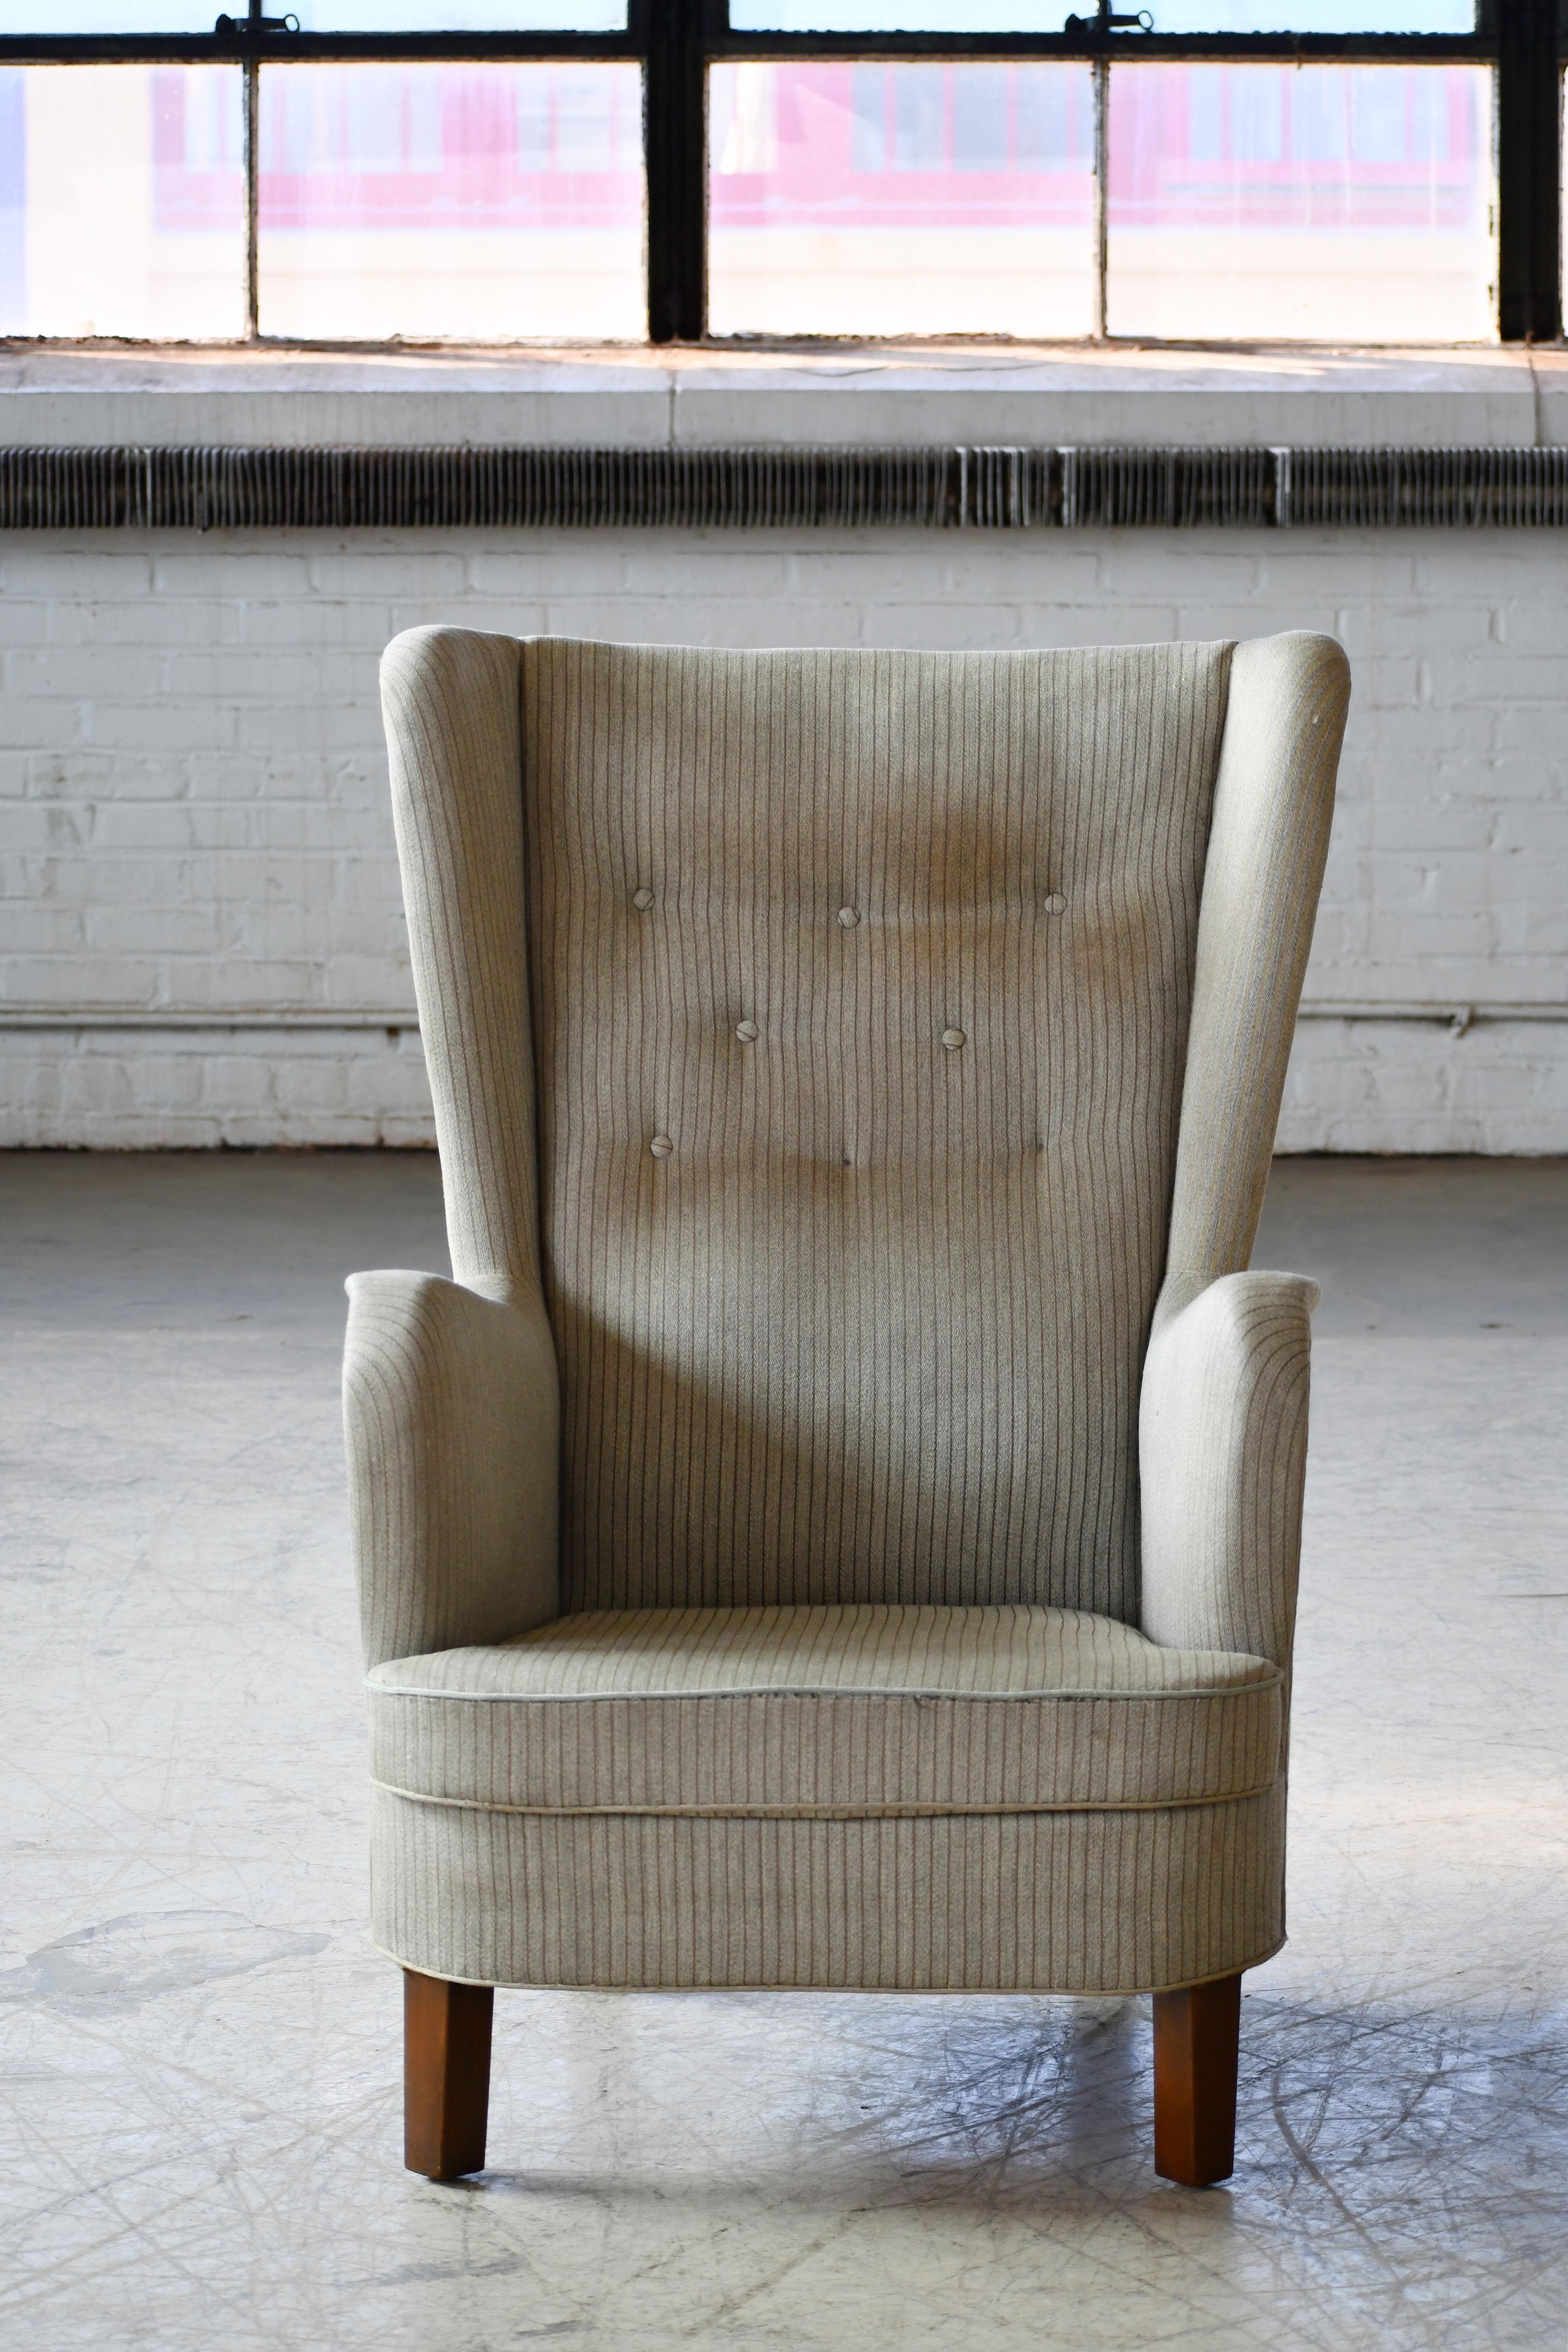 Great Danish 1950s high back armchair in the style of Peter Hvidt and his typical designs. We love the stylistically strong and simple yet refined lines. Tall slim silhouette raised on beech wood legs. The fabric is is showing wear and dirt and we